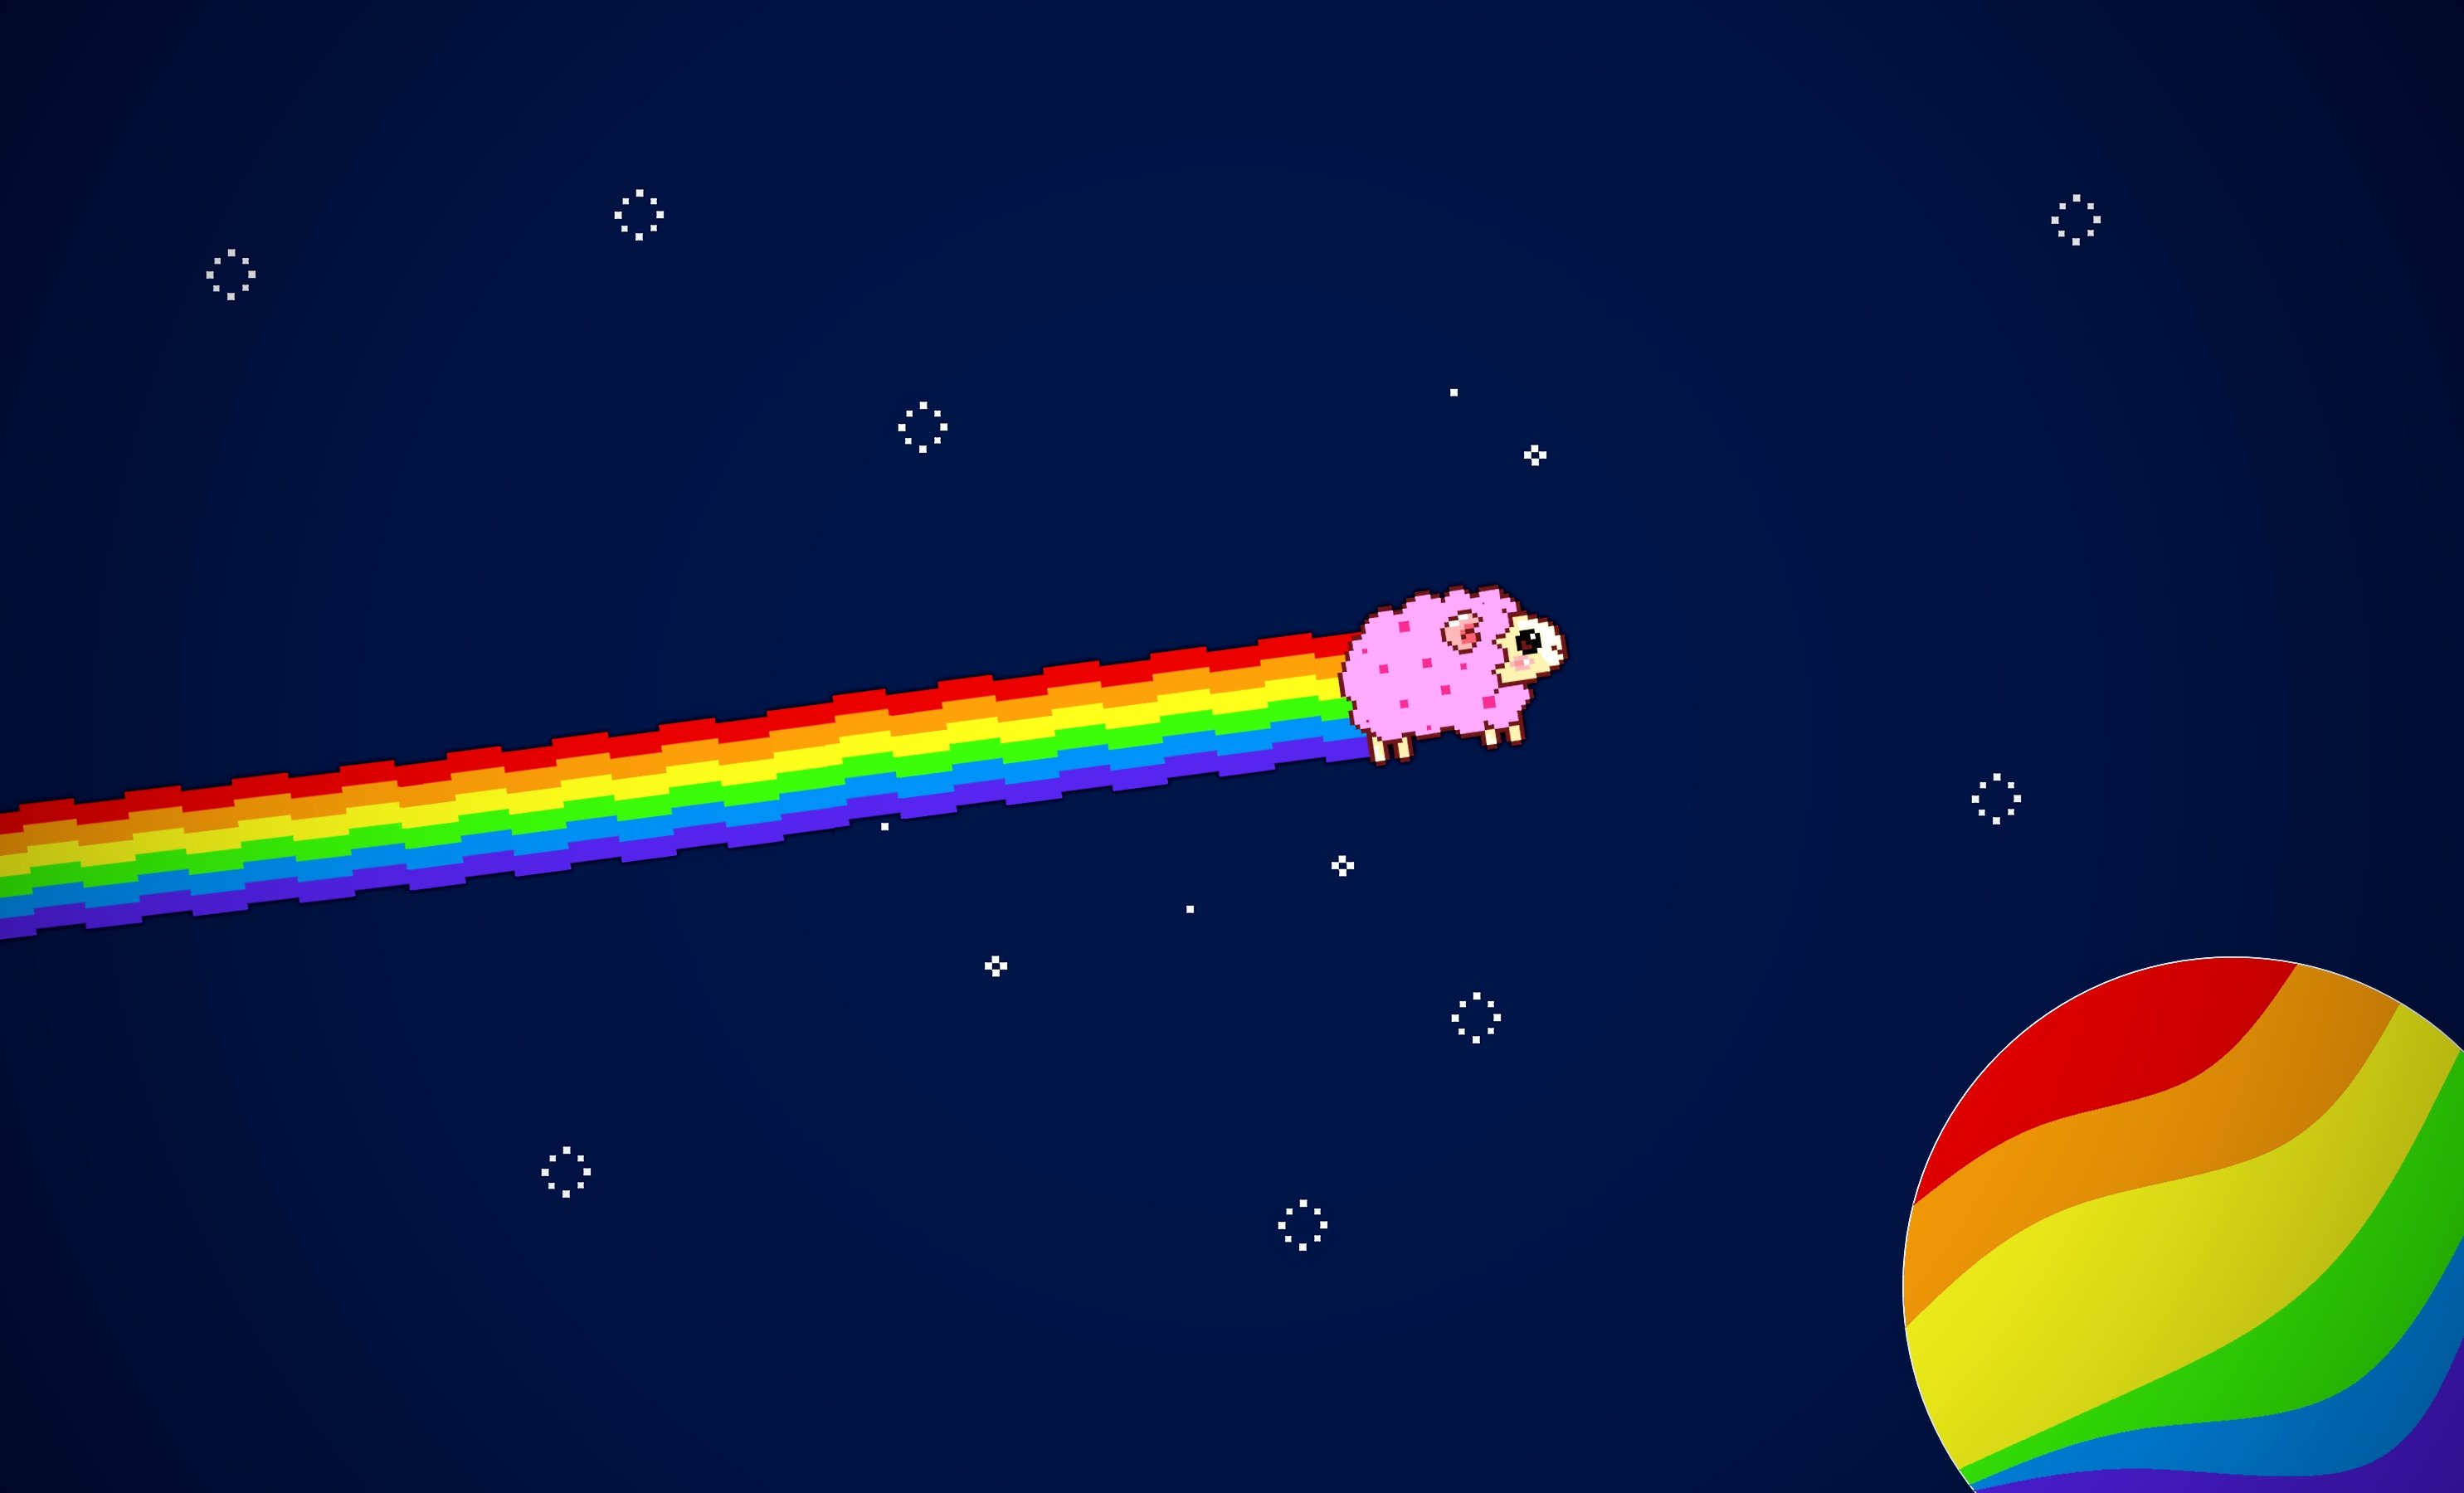 sheep, Nyan, Cat, Rainbow, Limitless, Tomleevis, Space, Pixel, Stars, Easy, Selfmade Wallpaper